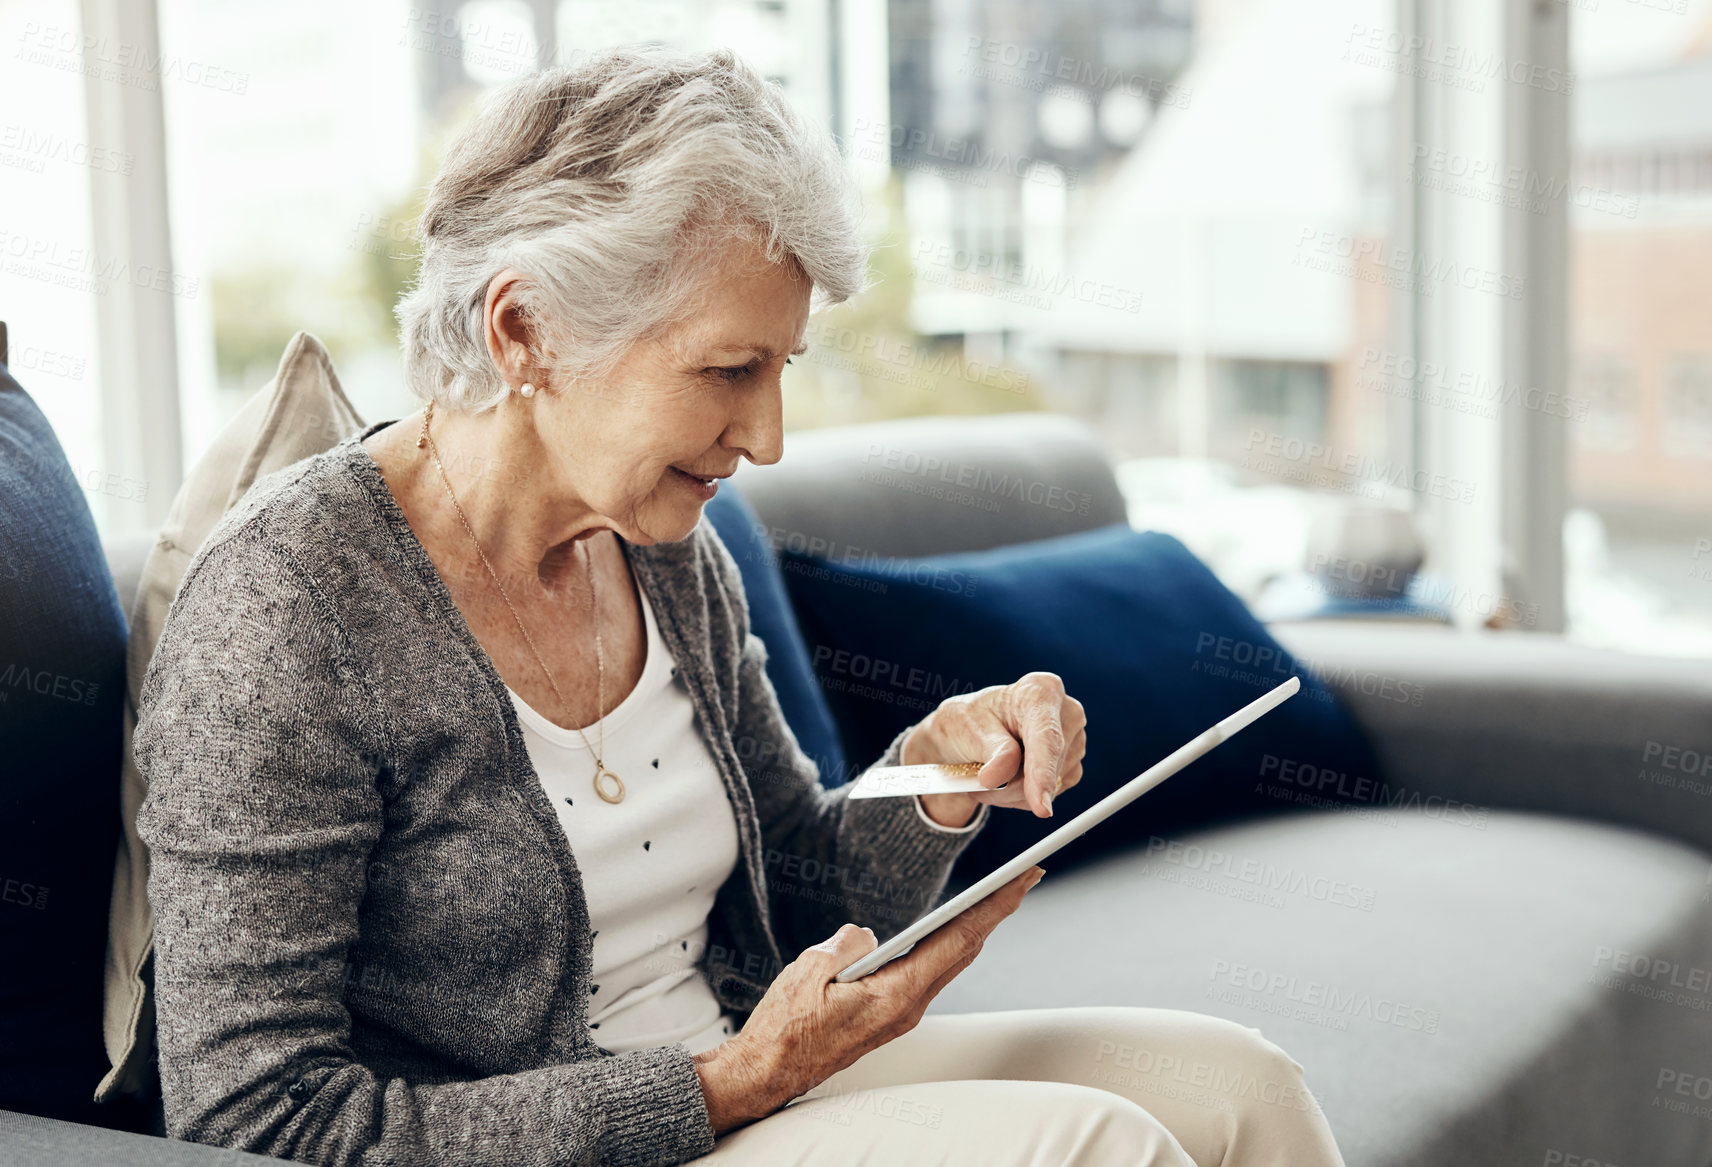 Buy stock photo Shot of a senior woman holding her credit card while browsing on a digital tablet